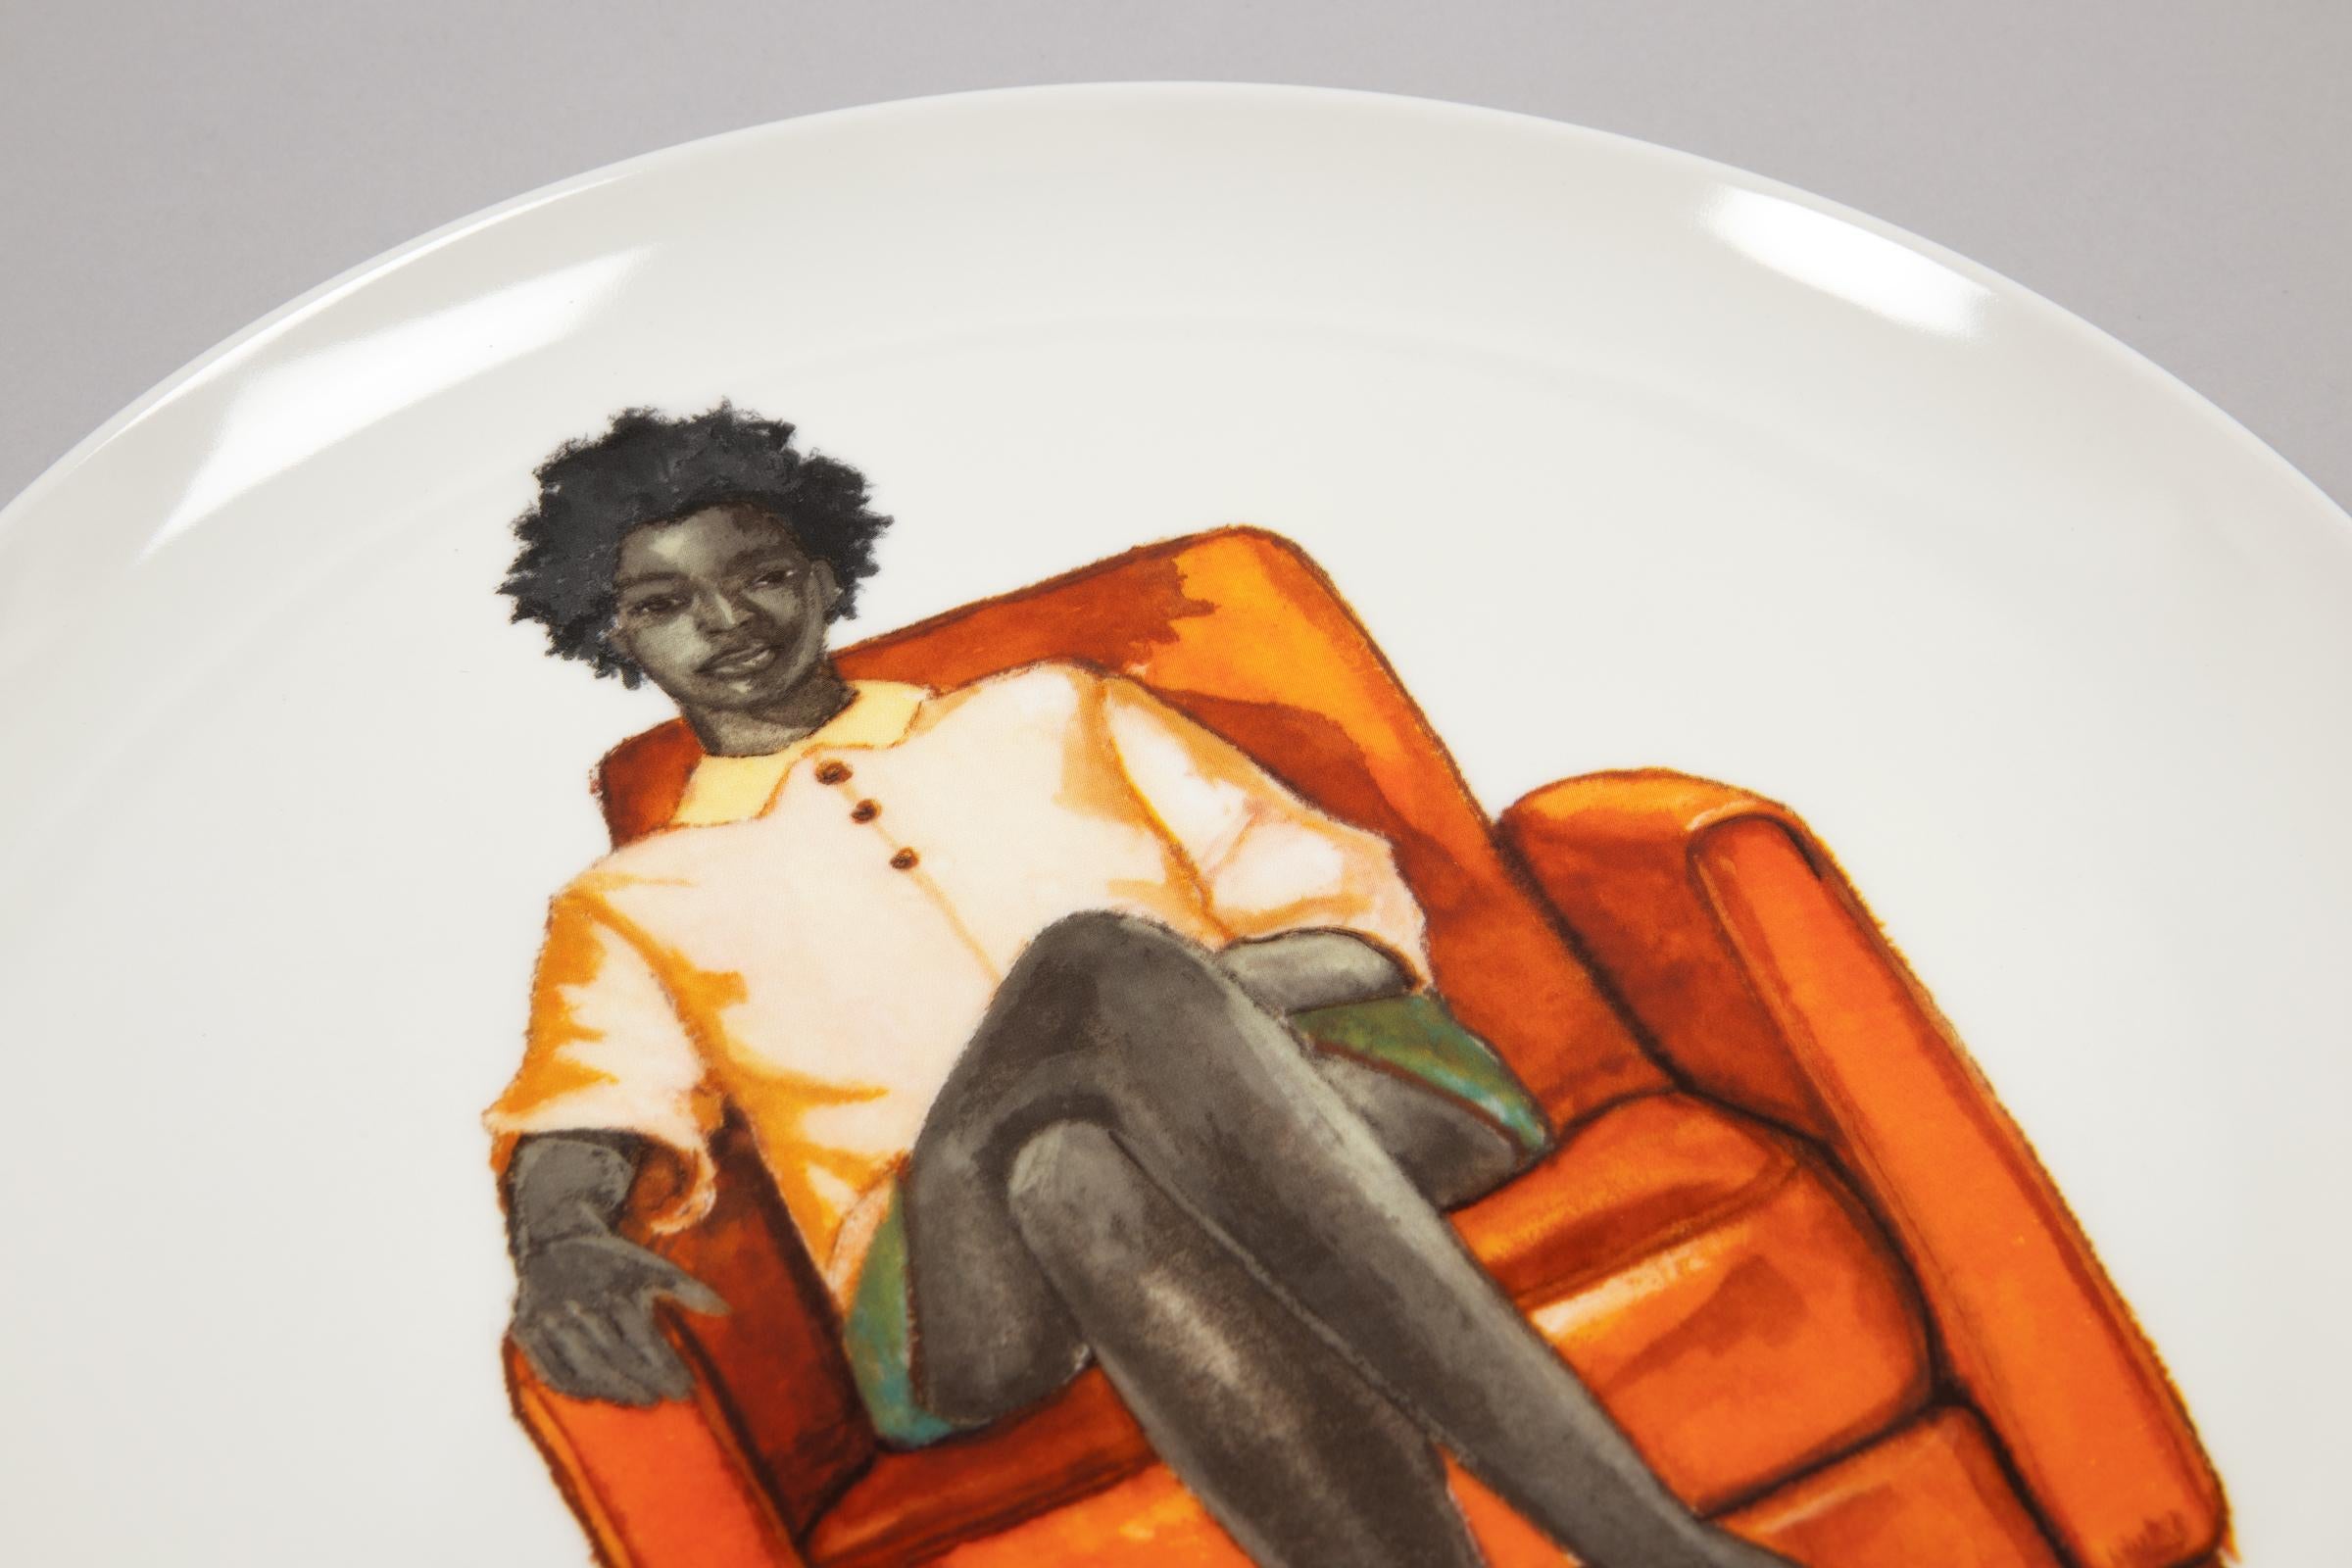 Amy Sherald (American, b. 1973)
Untitled, 2023
Medium: Fine bone china
Dimensions: 26.7 diameter (10 1/2 in)
Edition of 250: Not signed, not numbered (printed signature and edition details on verso)
Condition: Mint (in original presentation box)